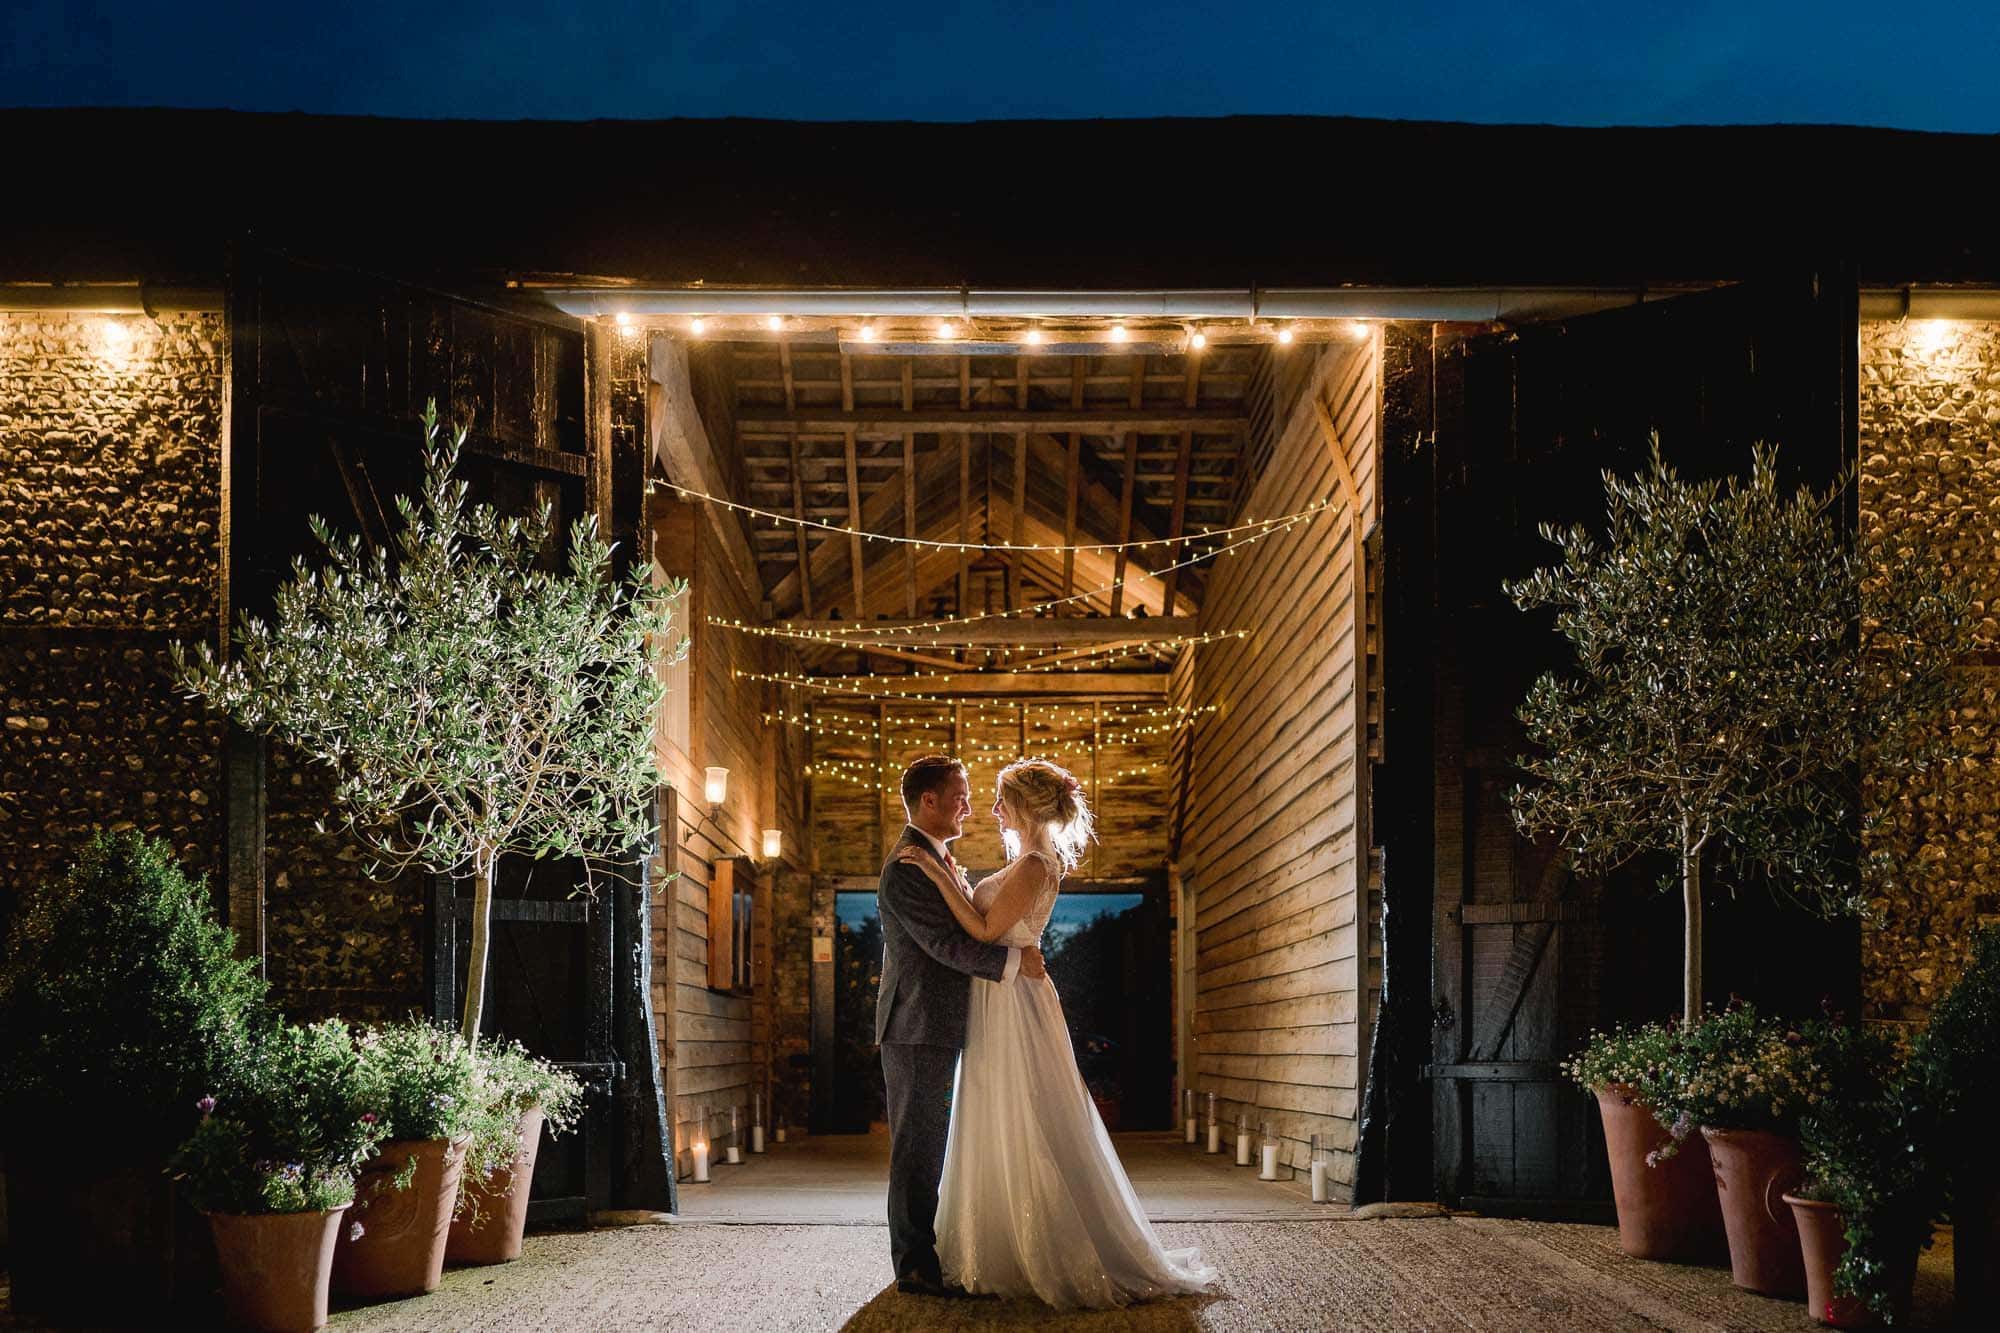 Upwaltham Barns Wedding Venue in Sussex with a bride and groom hugging in the foreground.